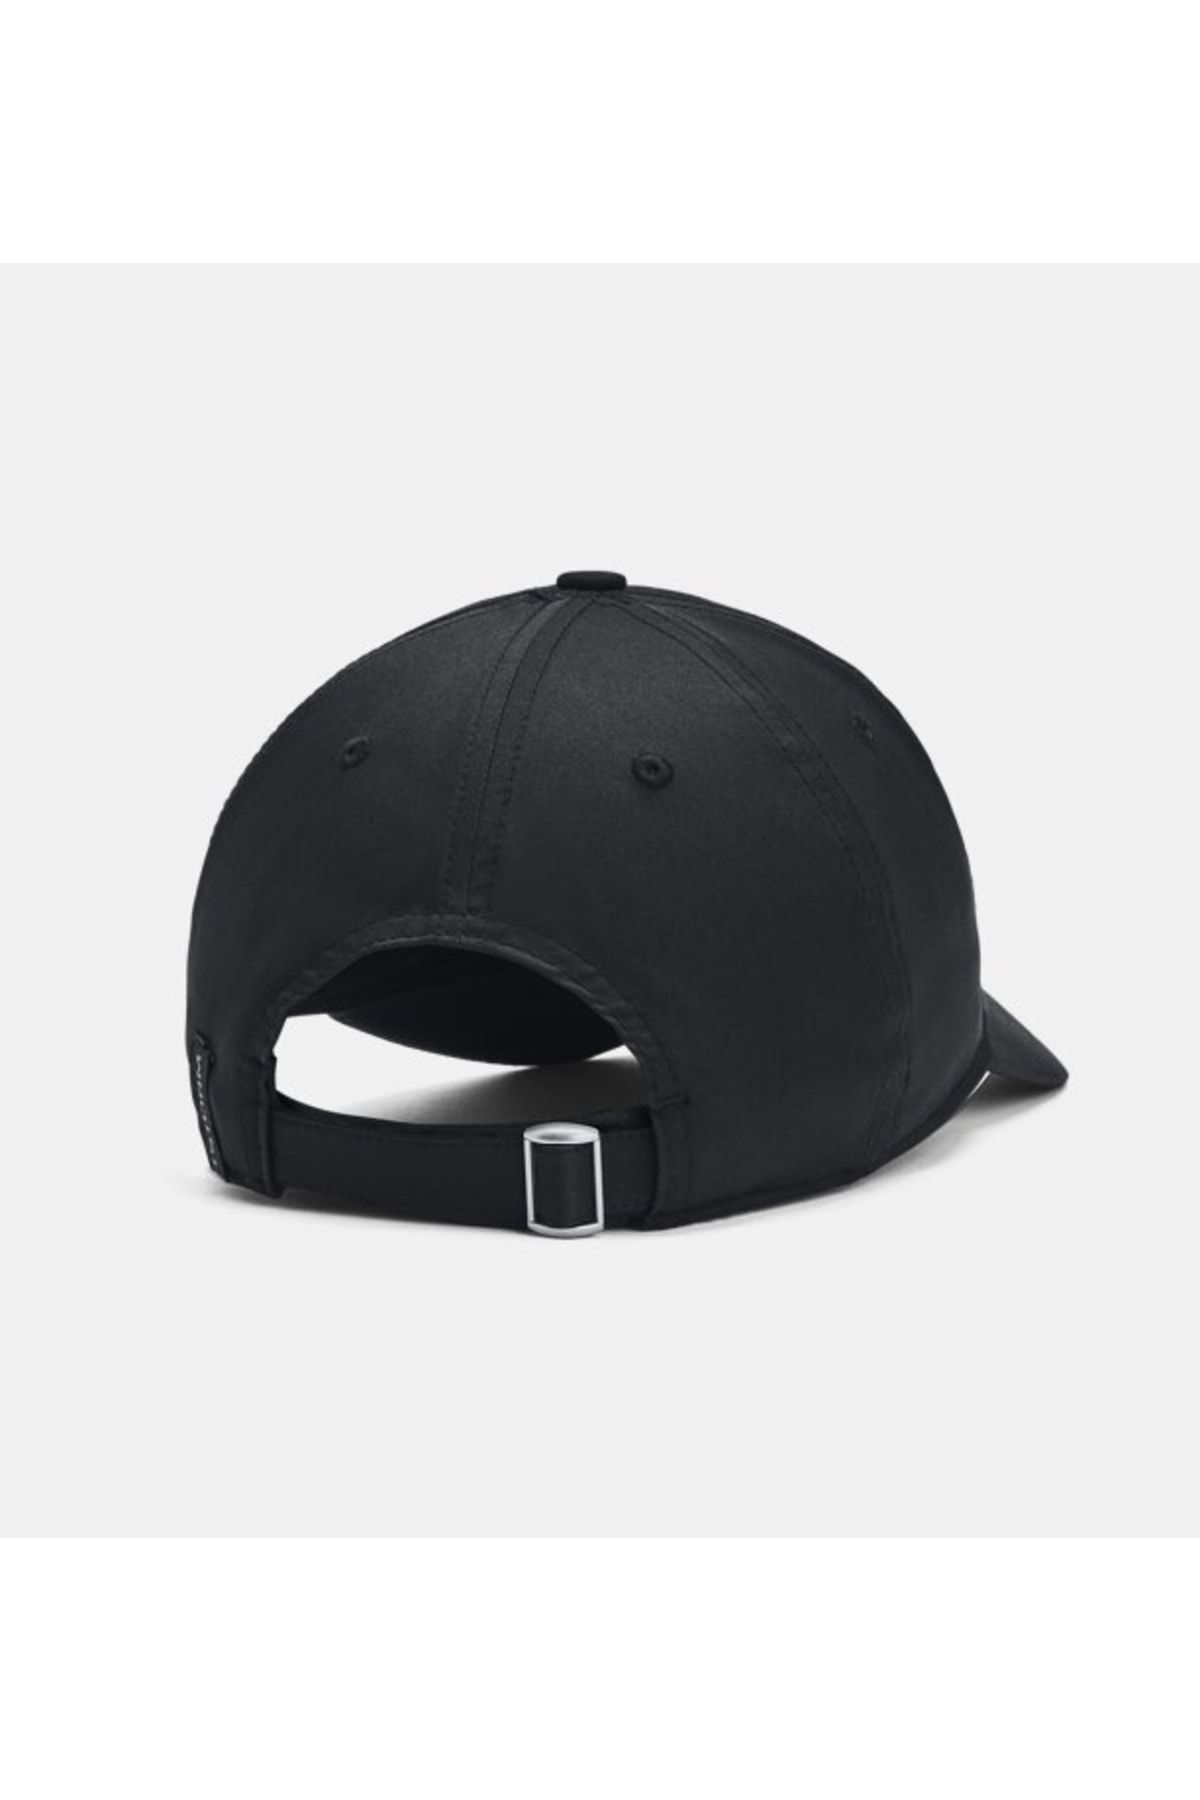 Under Armour HAT ROTABLE ROTALLING ROTALING طوفان مردانه 1369781-001